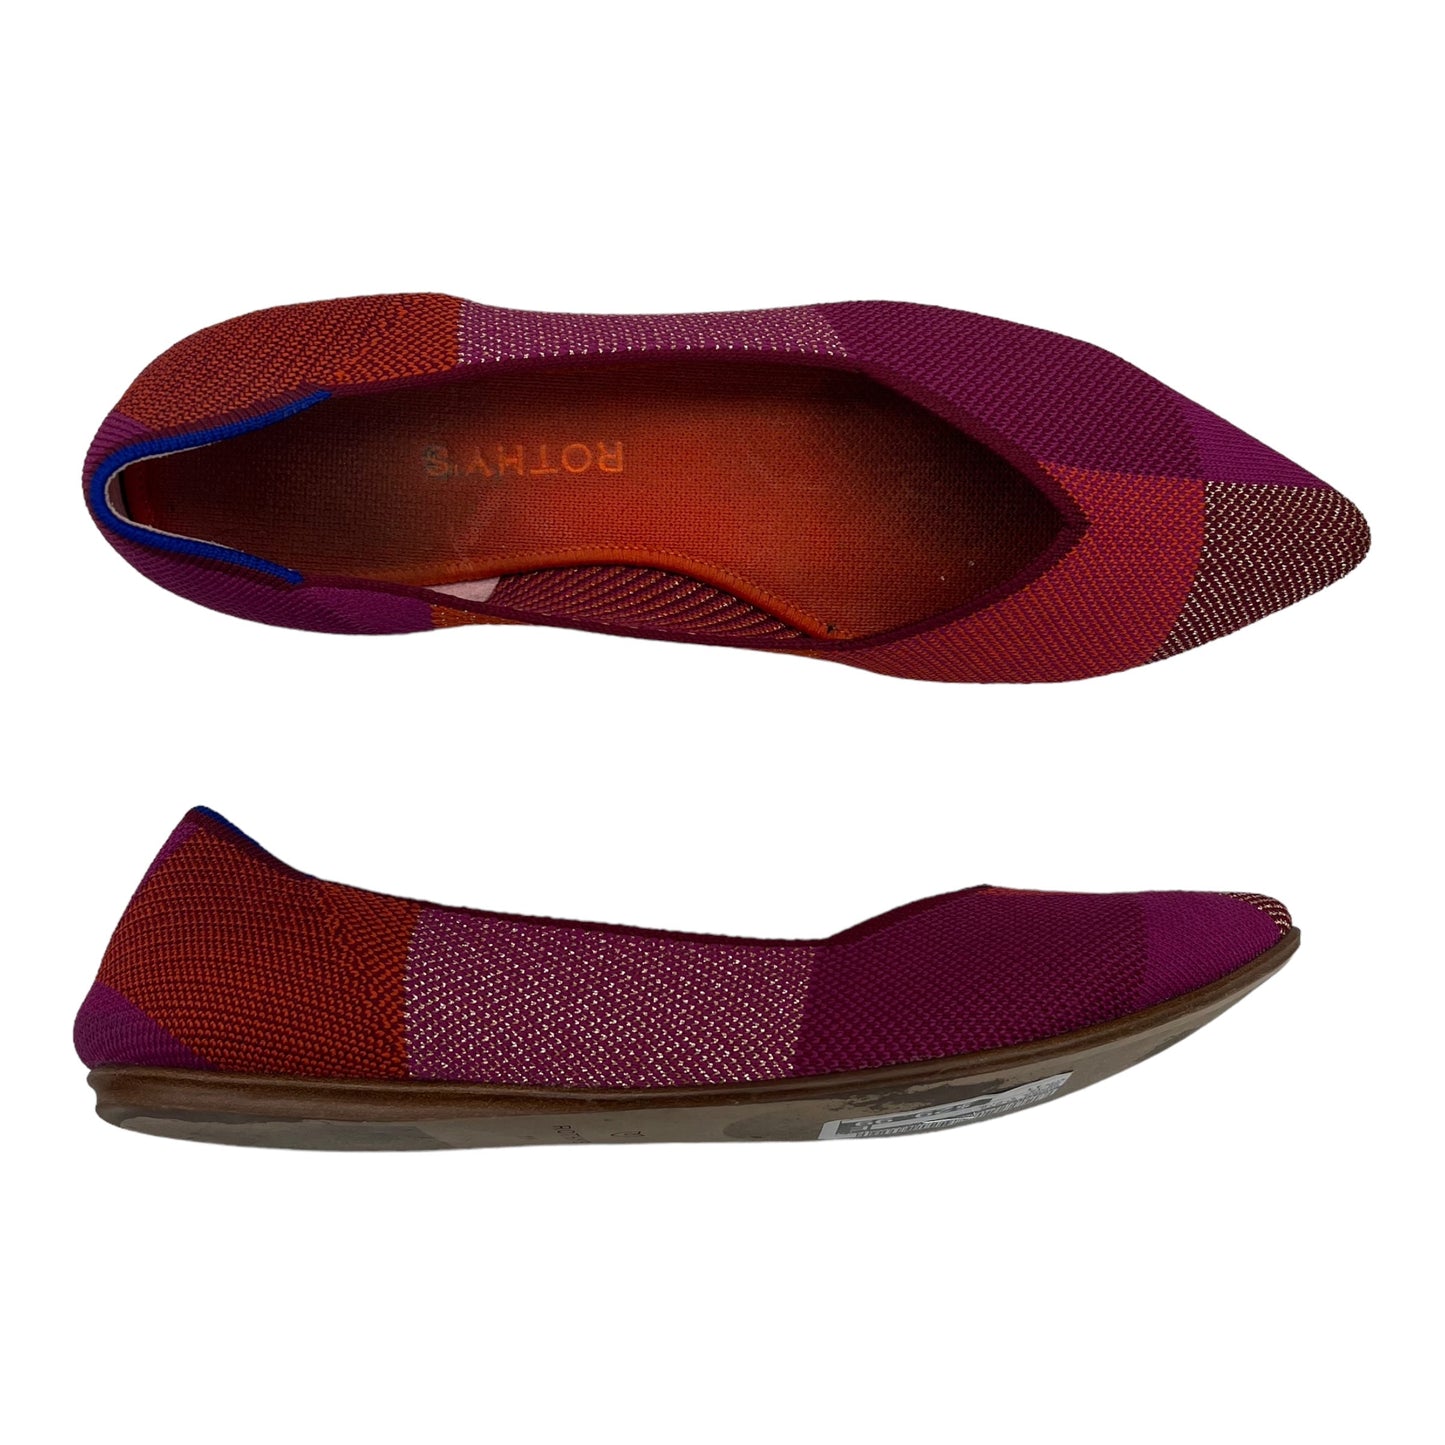 Shoes Flats By Rothys  Size: 11